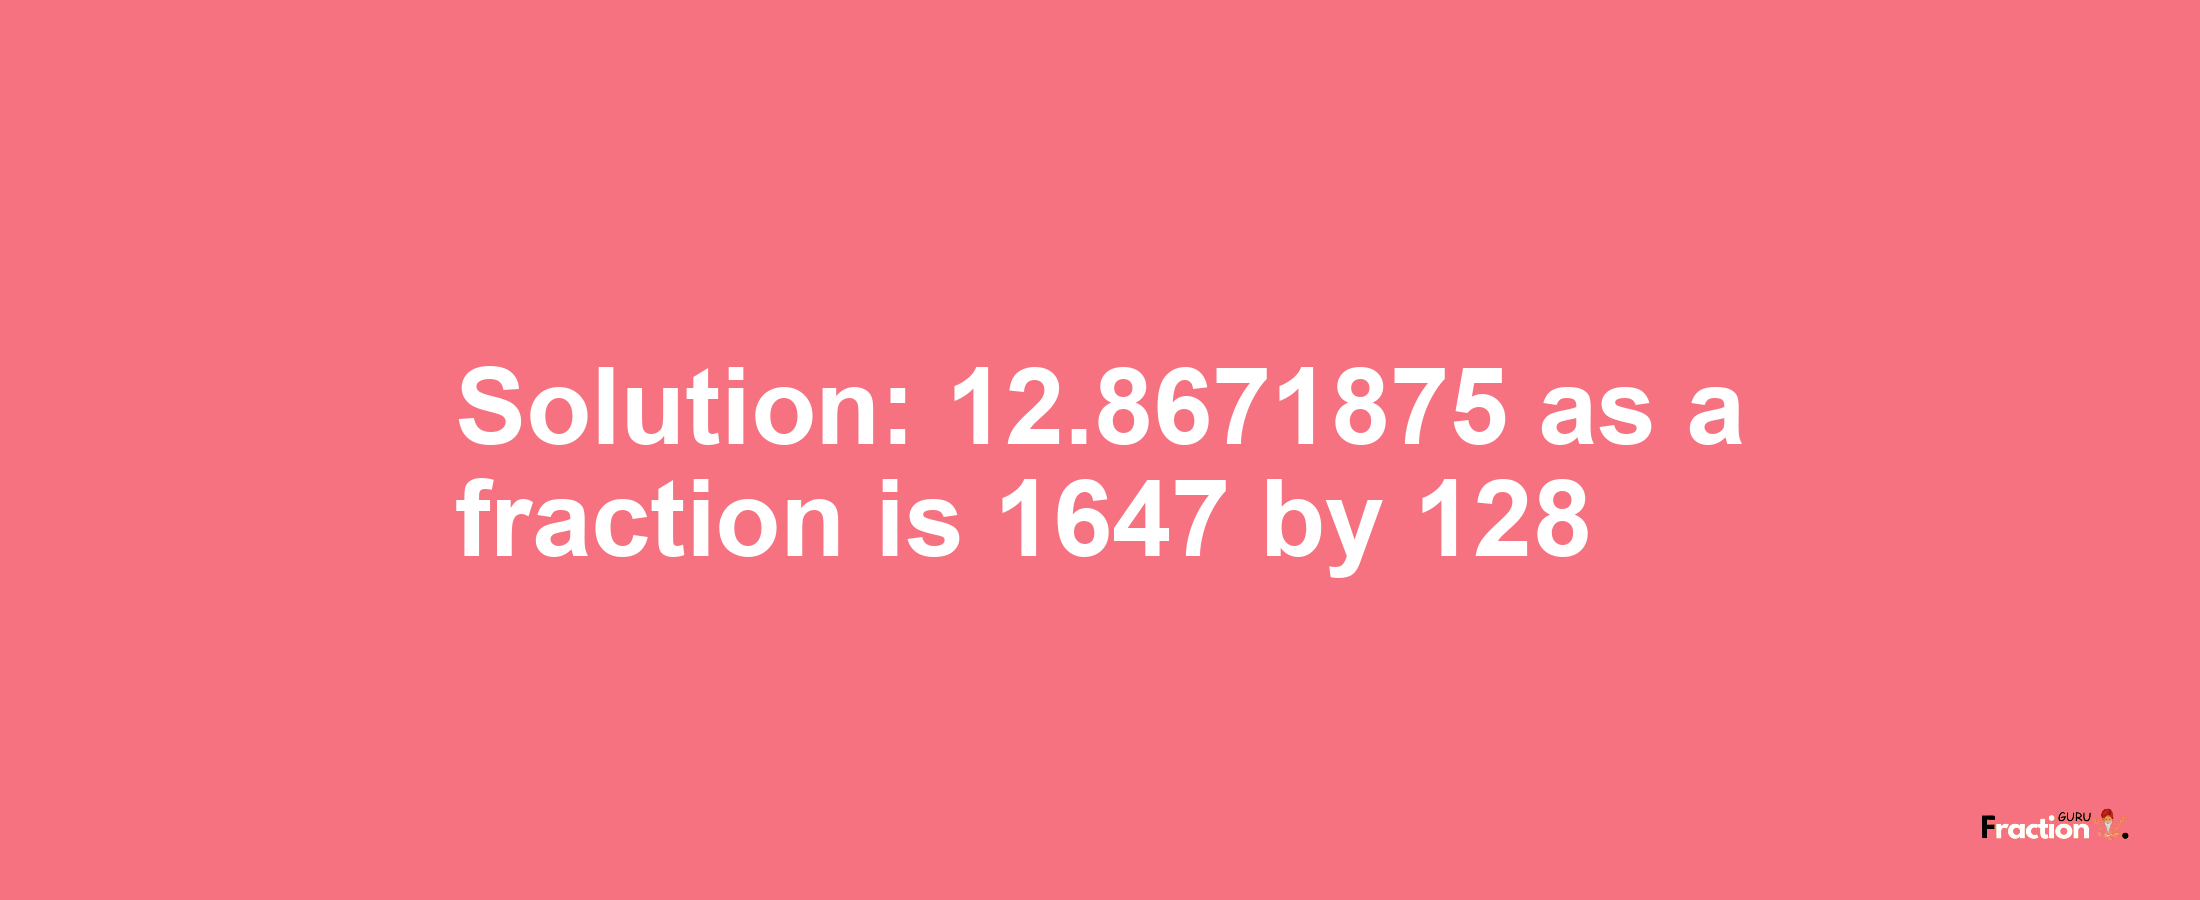 Solution:12.8671875 as a fraction is 1647/128